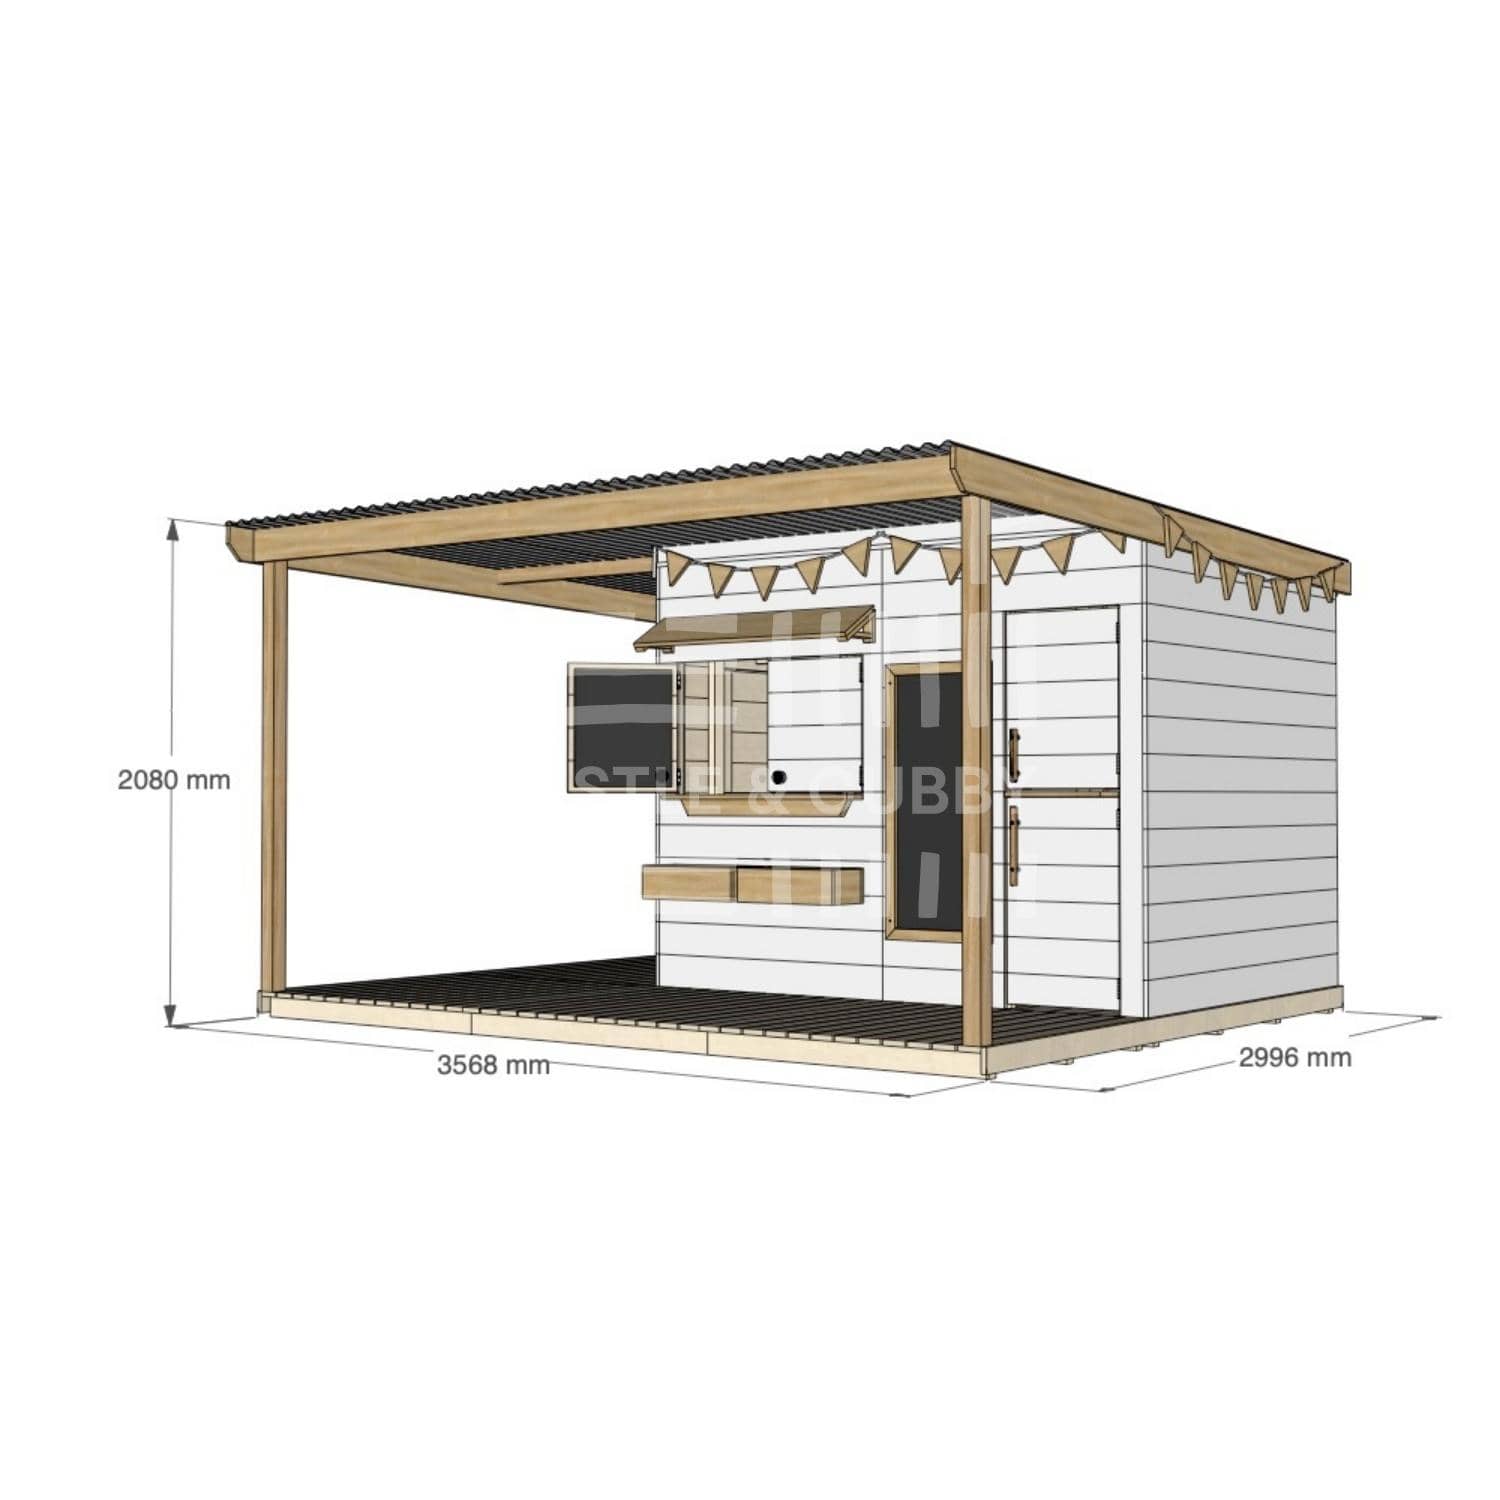 Painted pine extended height cubby house with wraparound verandah for residential backyards large rectangle size with dimensions